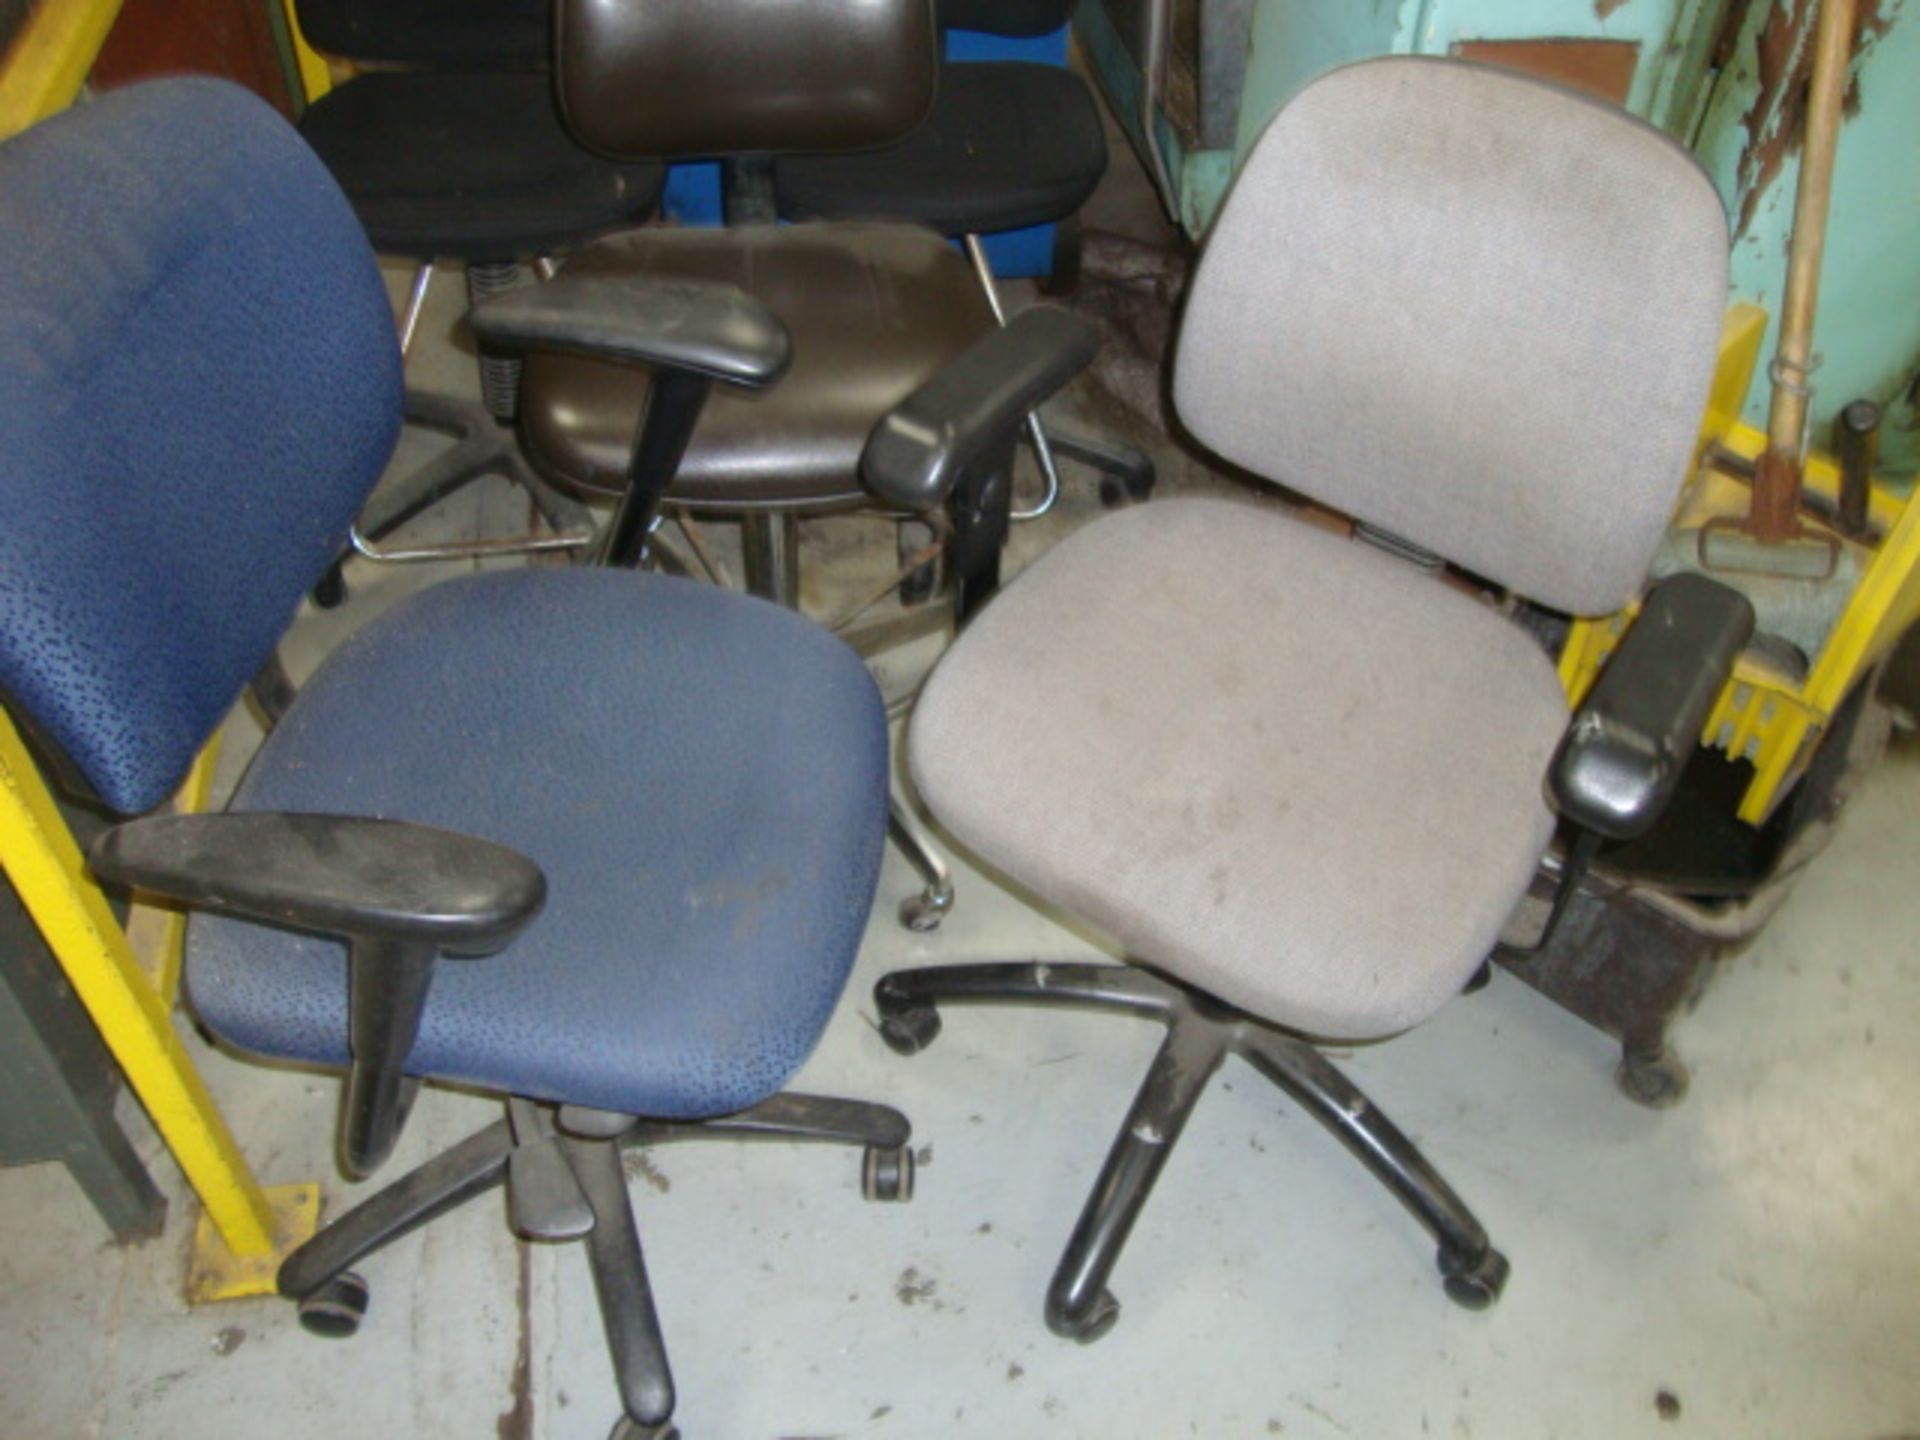 Lot of 6 Assorted Chairs and Mop Bucket - Image 3 of 4